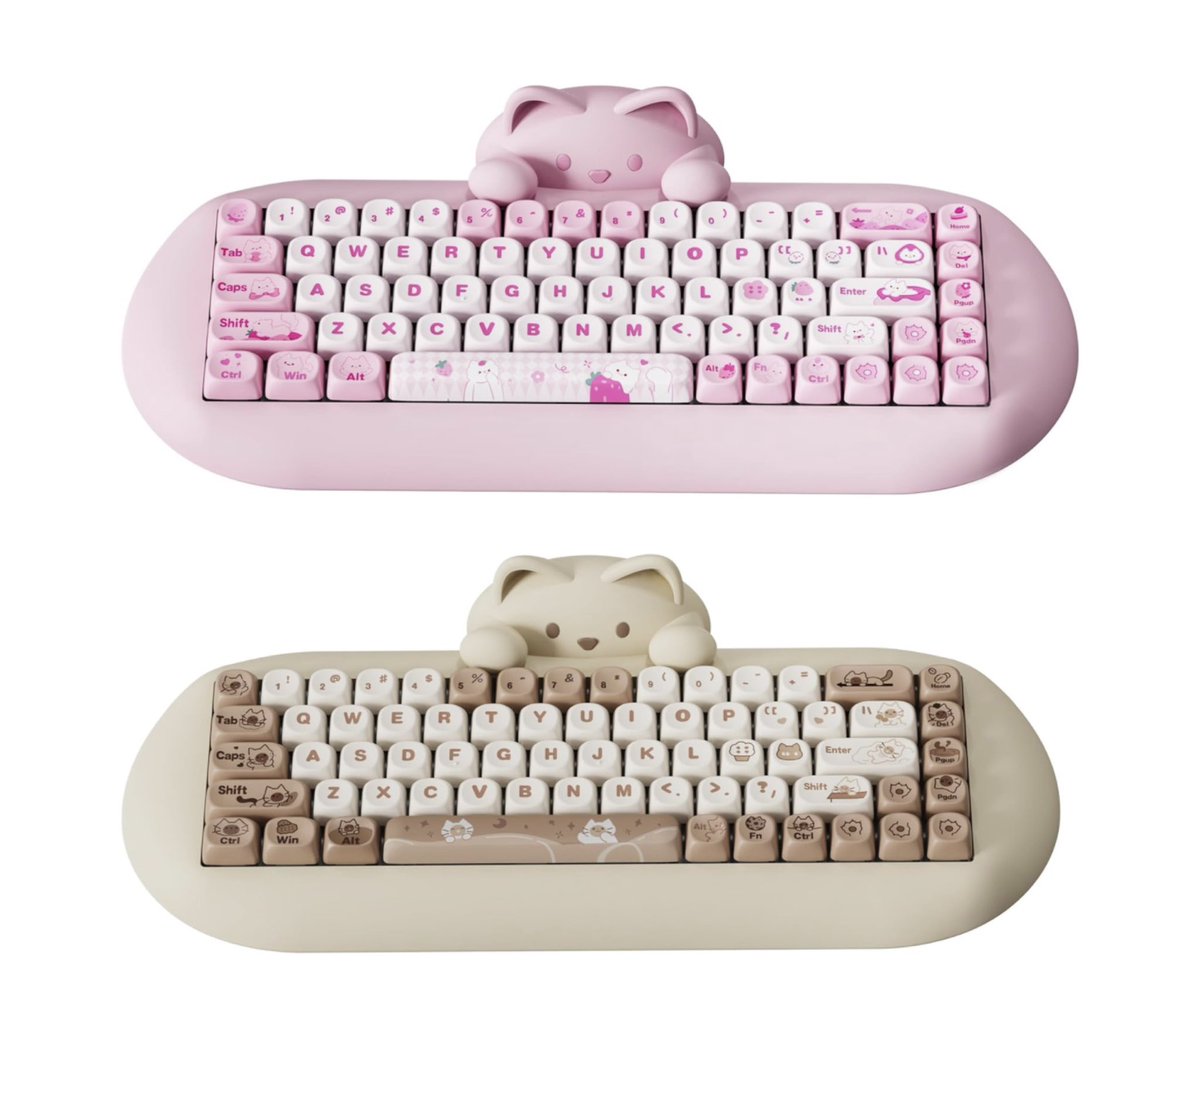 kitty keyboard giveaway *:･ﾟ✧*:･ﾟ
giving away pink or brown keyboard 
🌸 follow me & @piinkimi_
✨like and retweet
🧁tag a friend
ends on 4/15